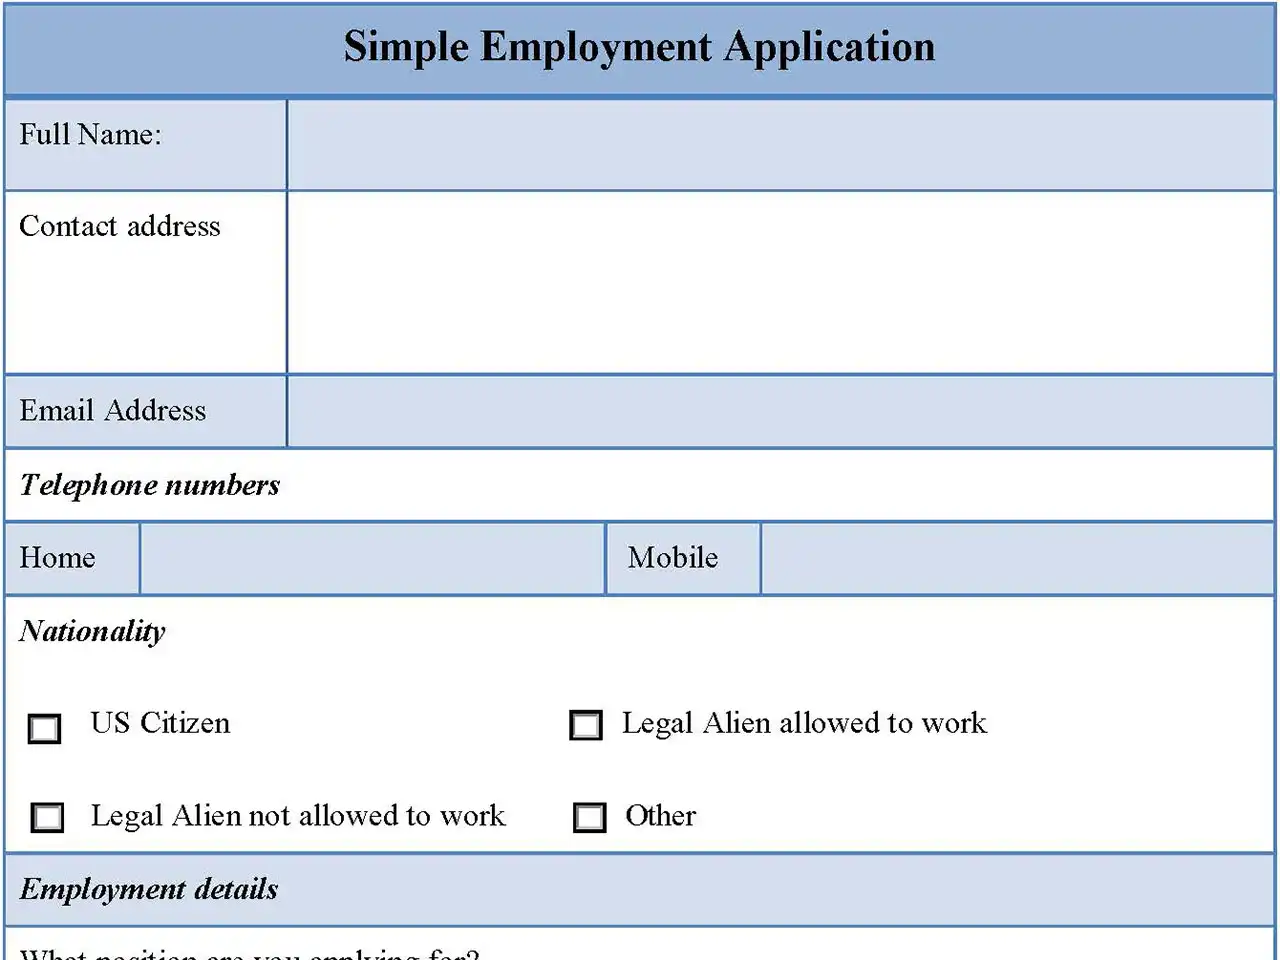 Simple Employment Application Format